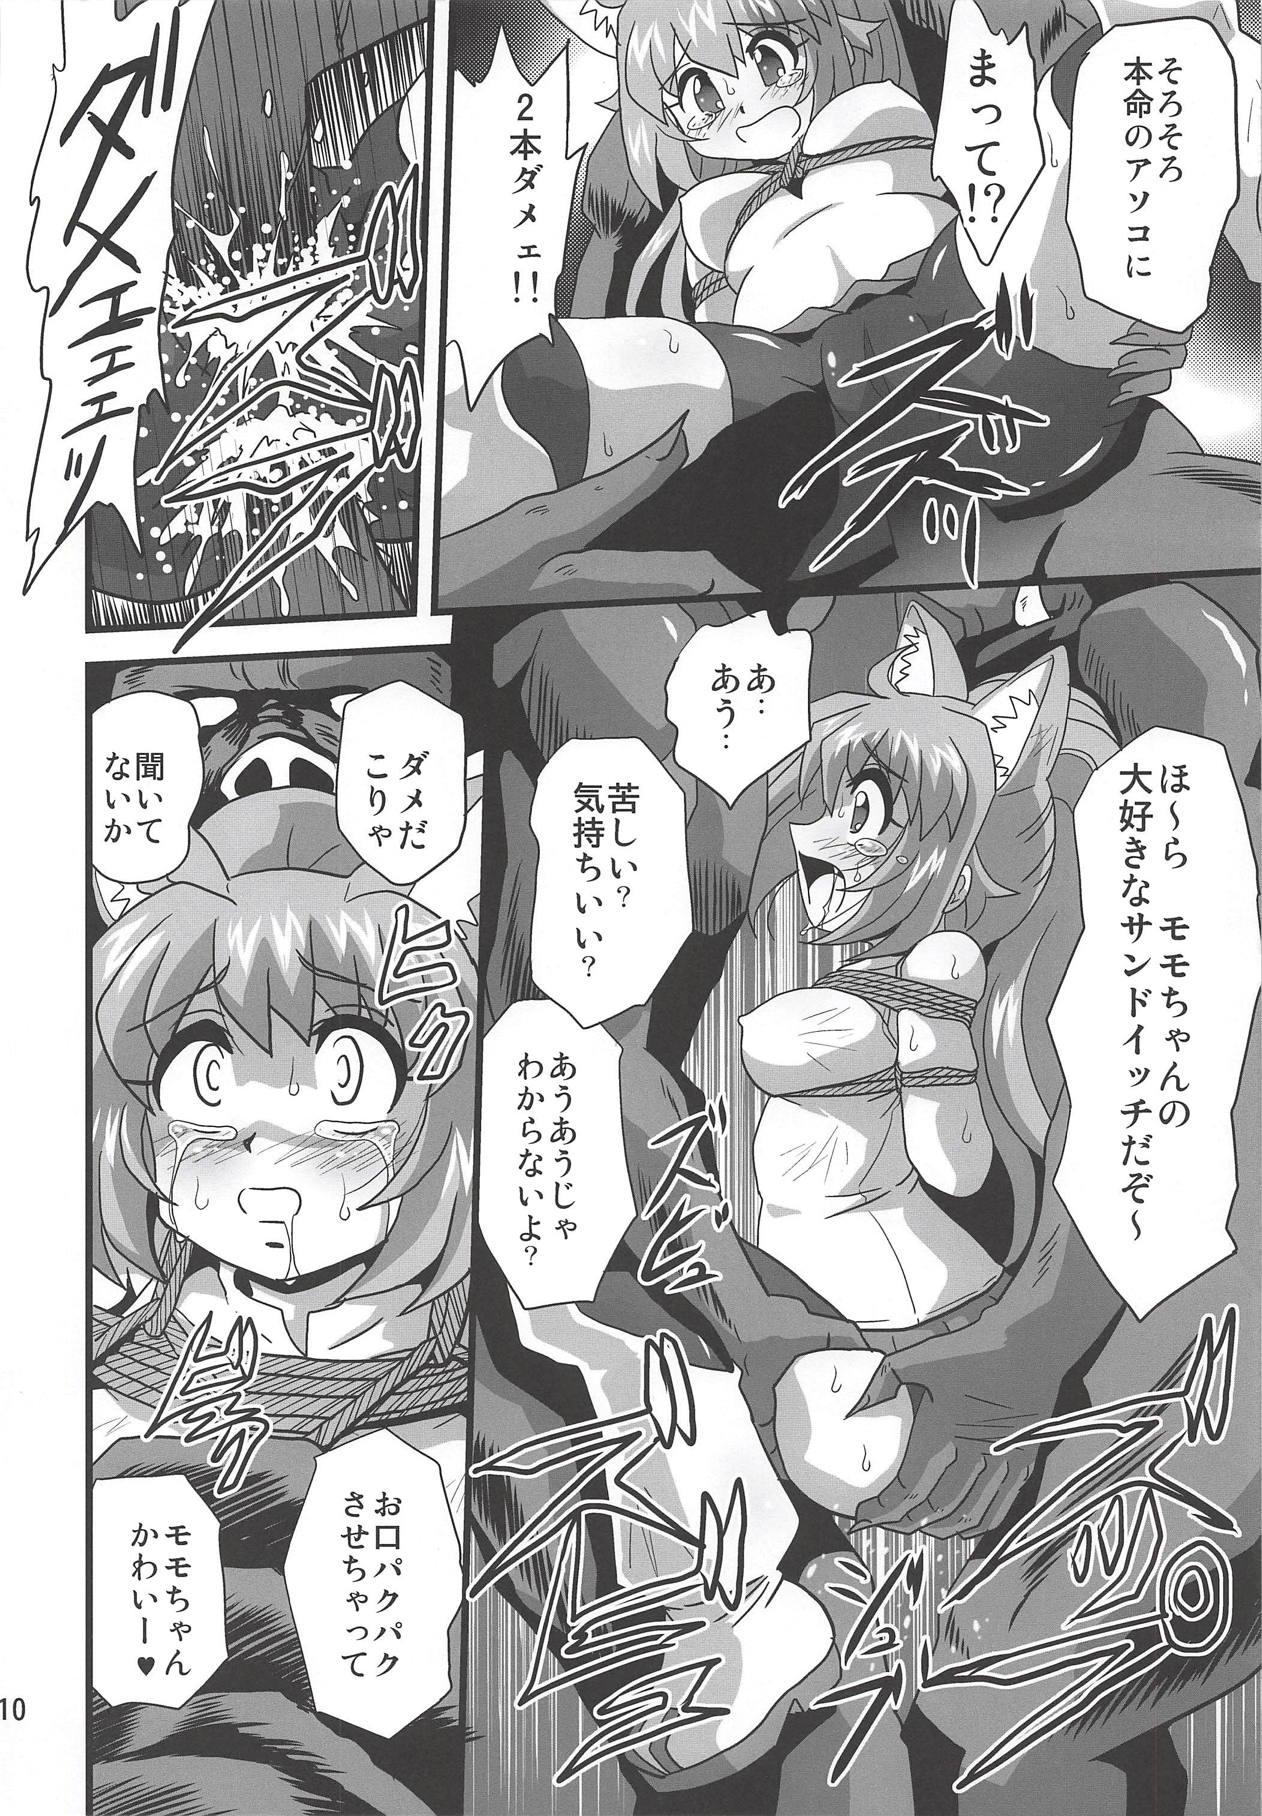 Athletic Diver's High 2 - Gundam build divers Cumload - Page 9